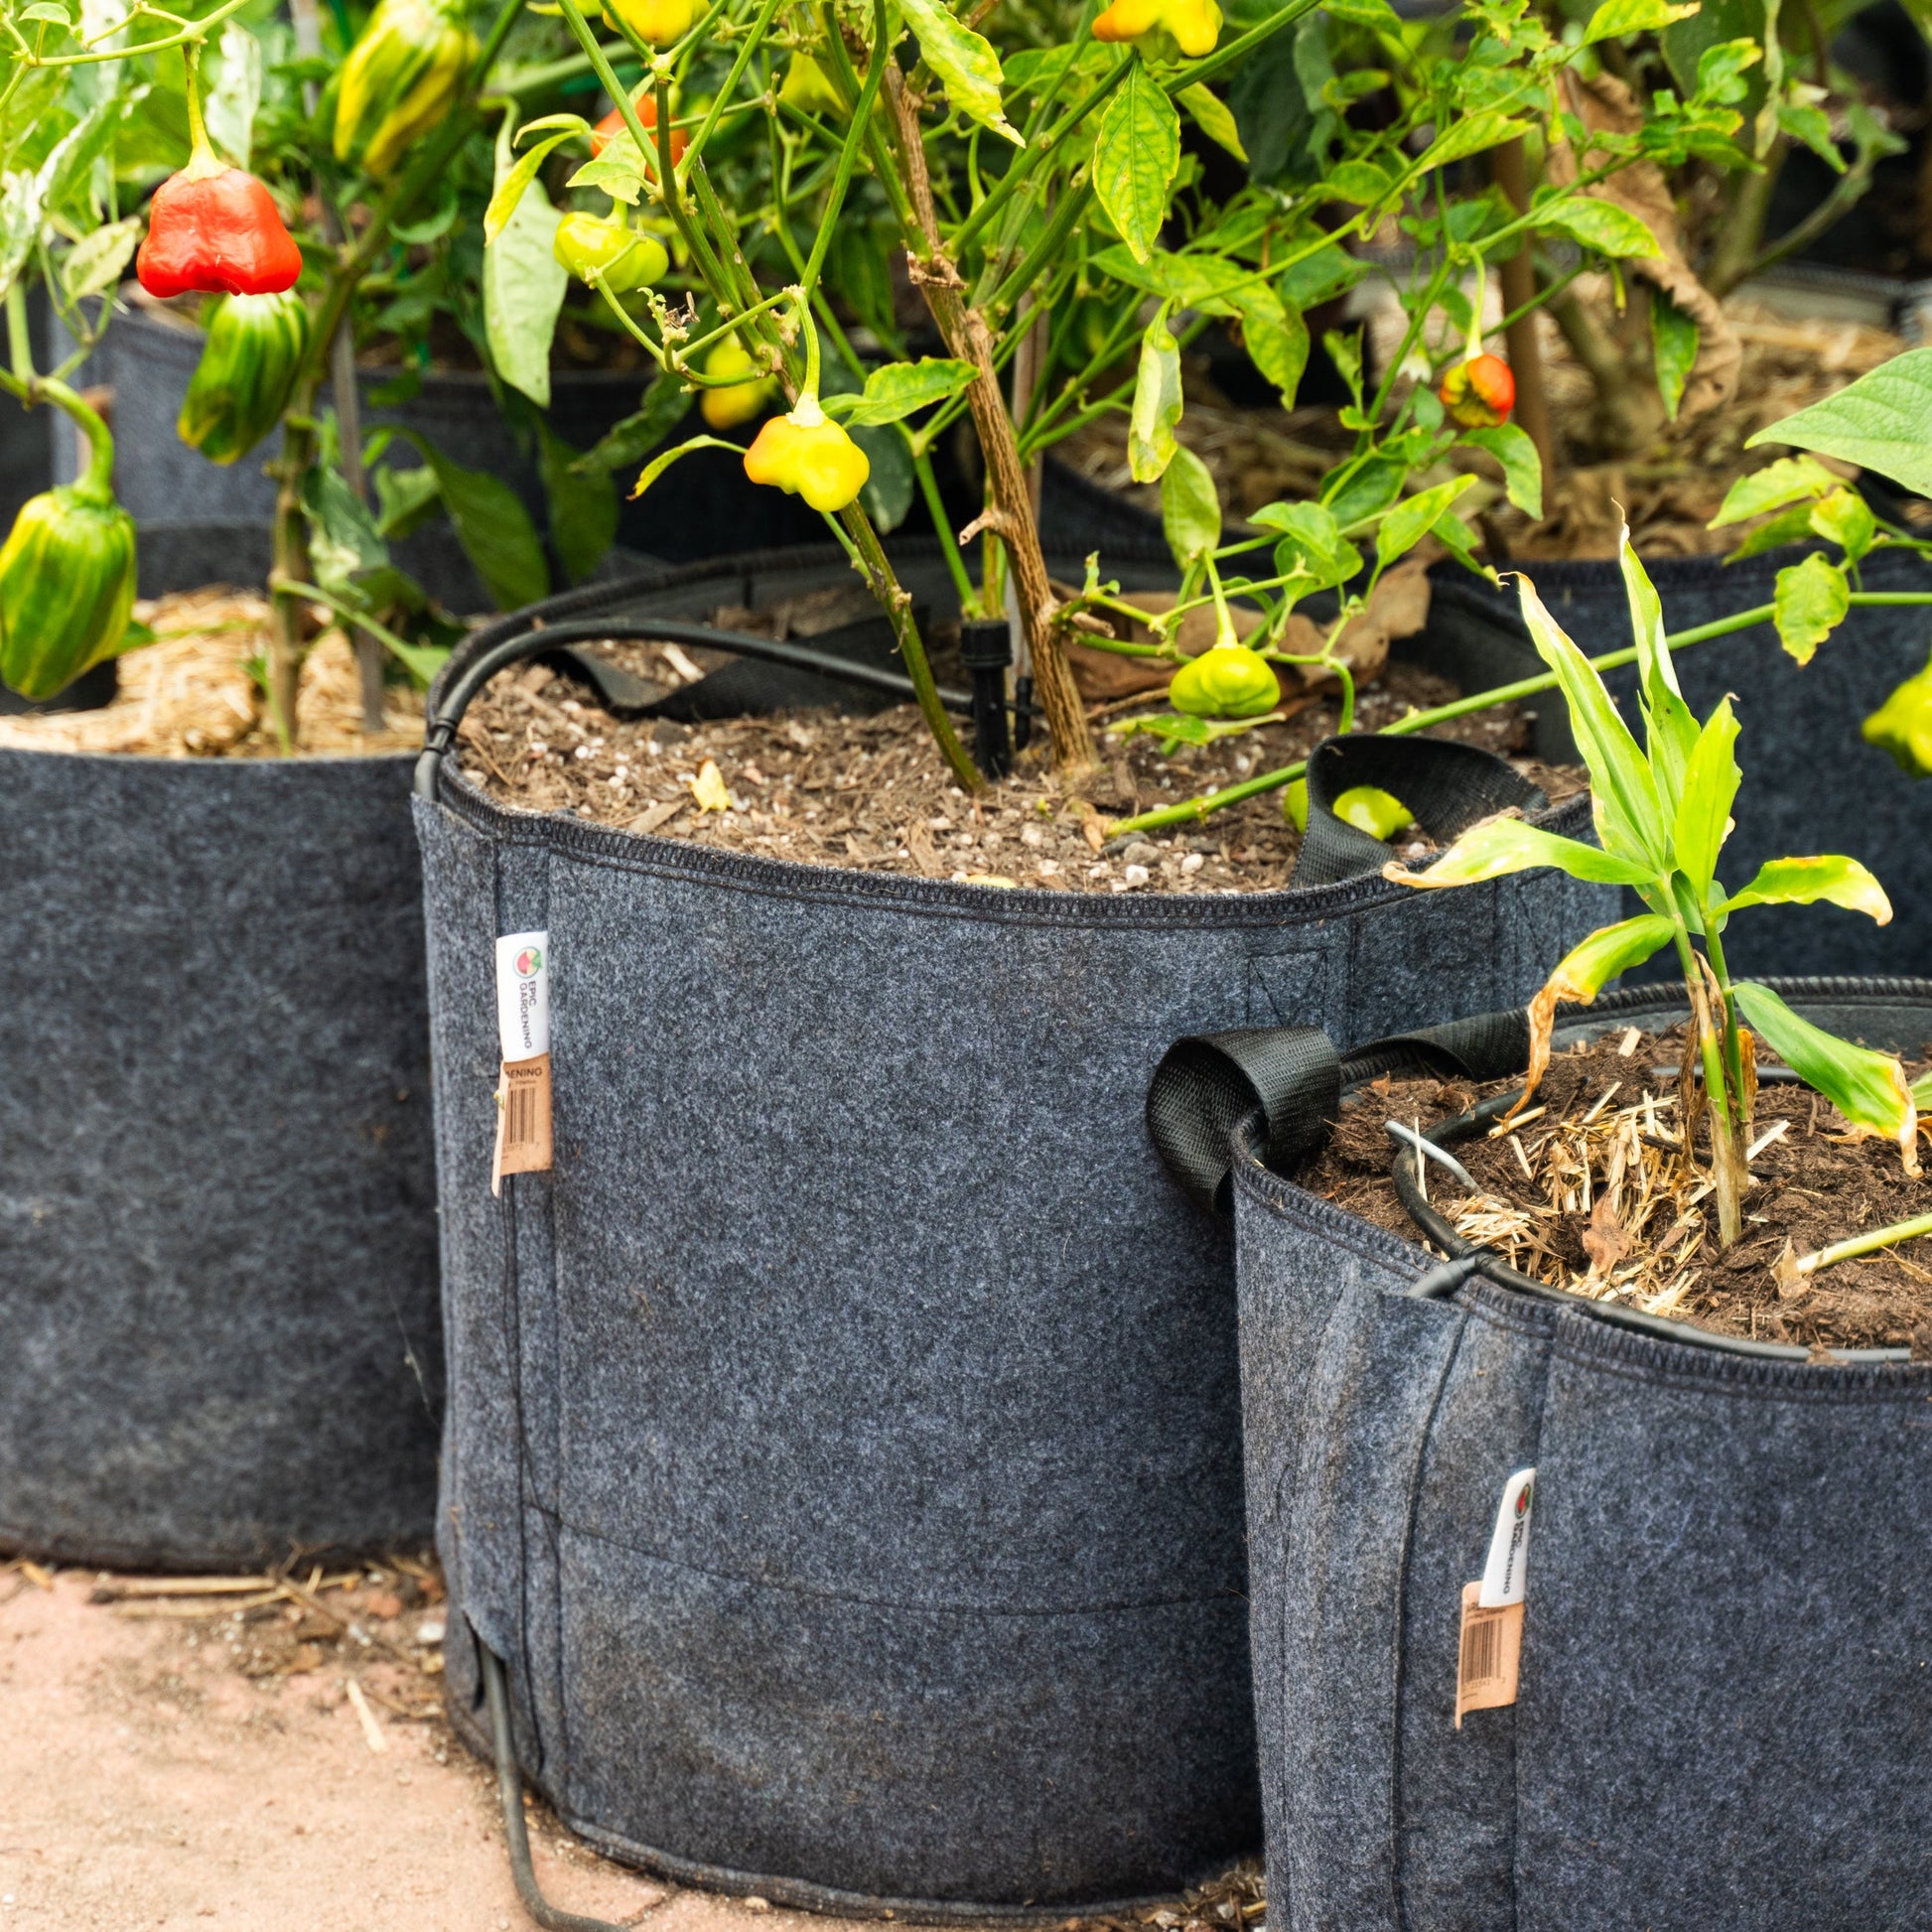 Are Grow Bags Safe? Grow Bag Pros And Cons - Epic Gardening